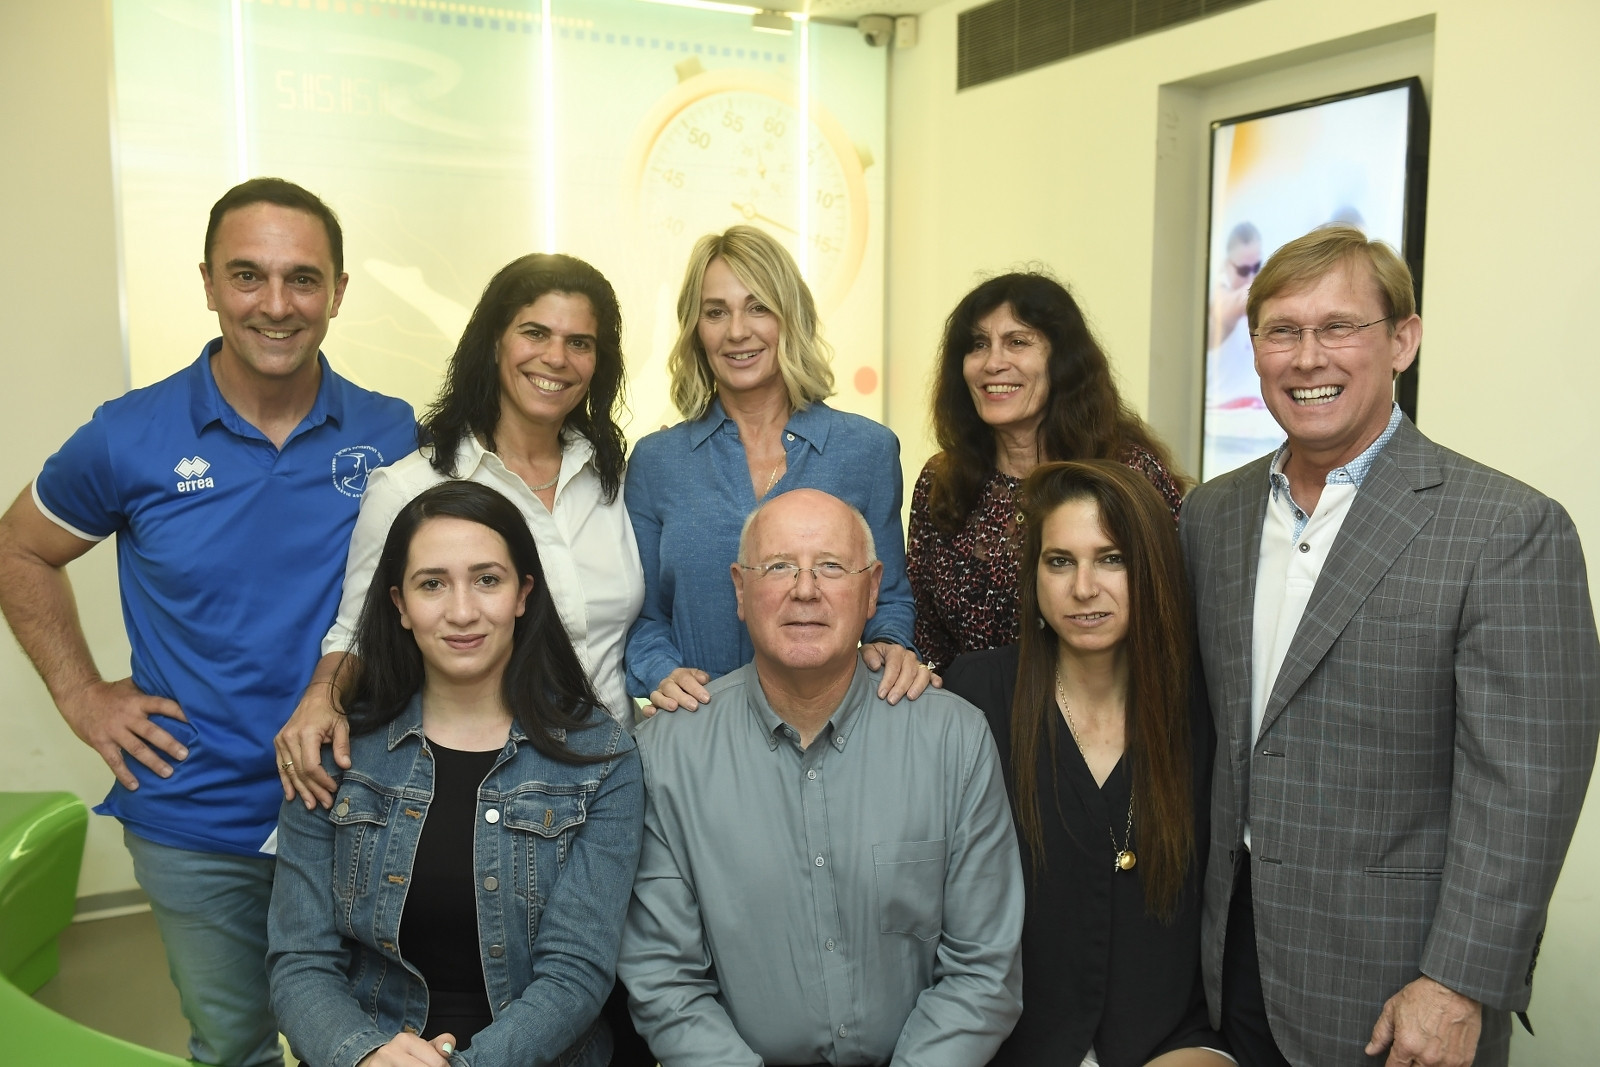 Romanian gymnastics legend Nadia Comăneci has visited the headquarters of the Olympic Committee of Israel ©OCI